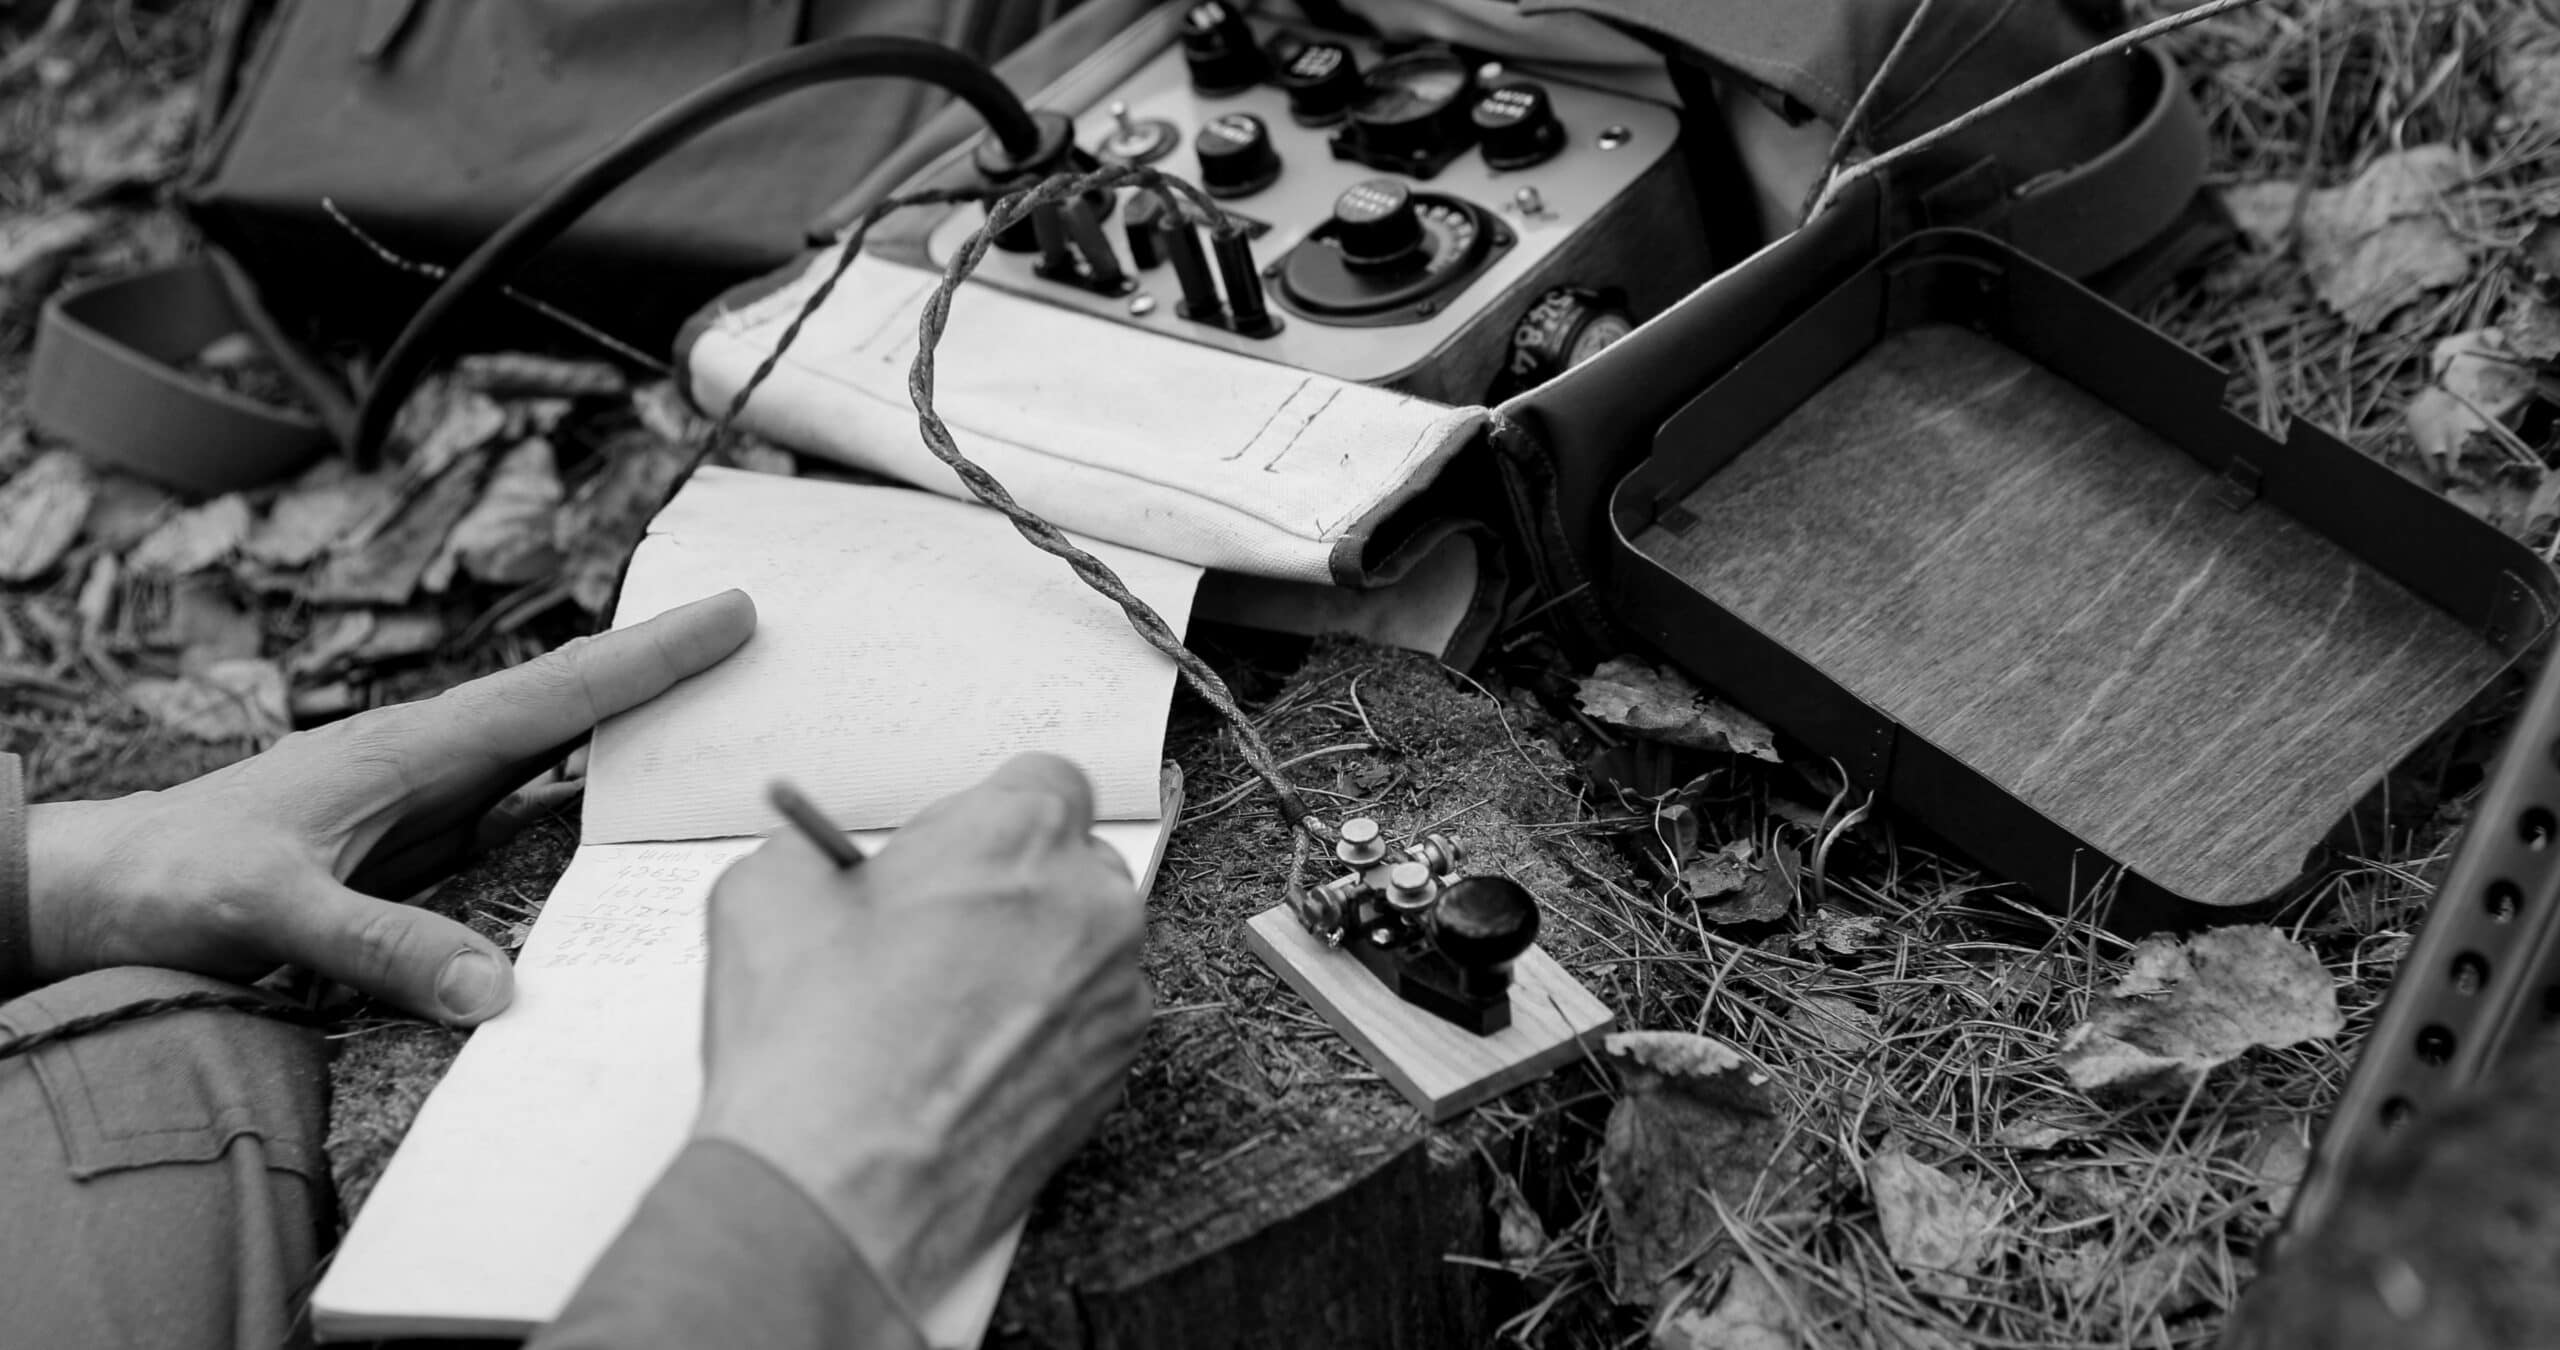 Infantry Army Soldier In World War II using Portable Radio Transceiver In Trench Entrenchment In Forest. . Headphones And Telegraph Key. Close Up Hands, Black And White Colors